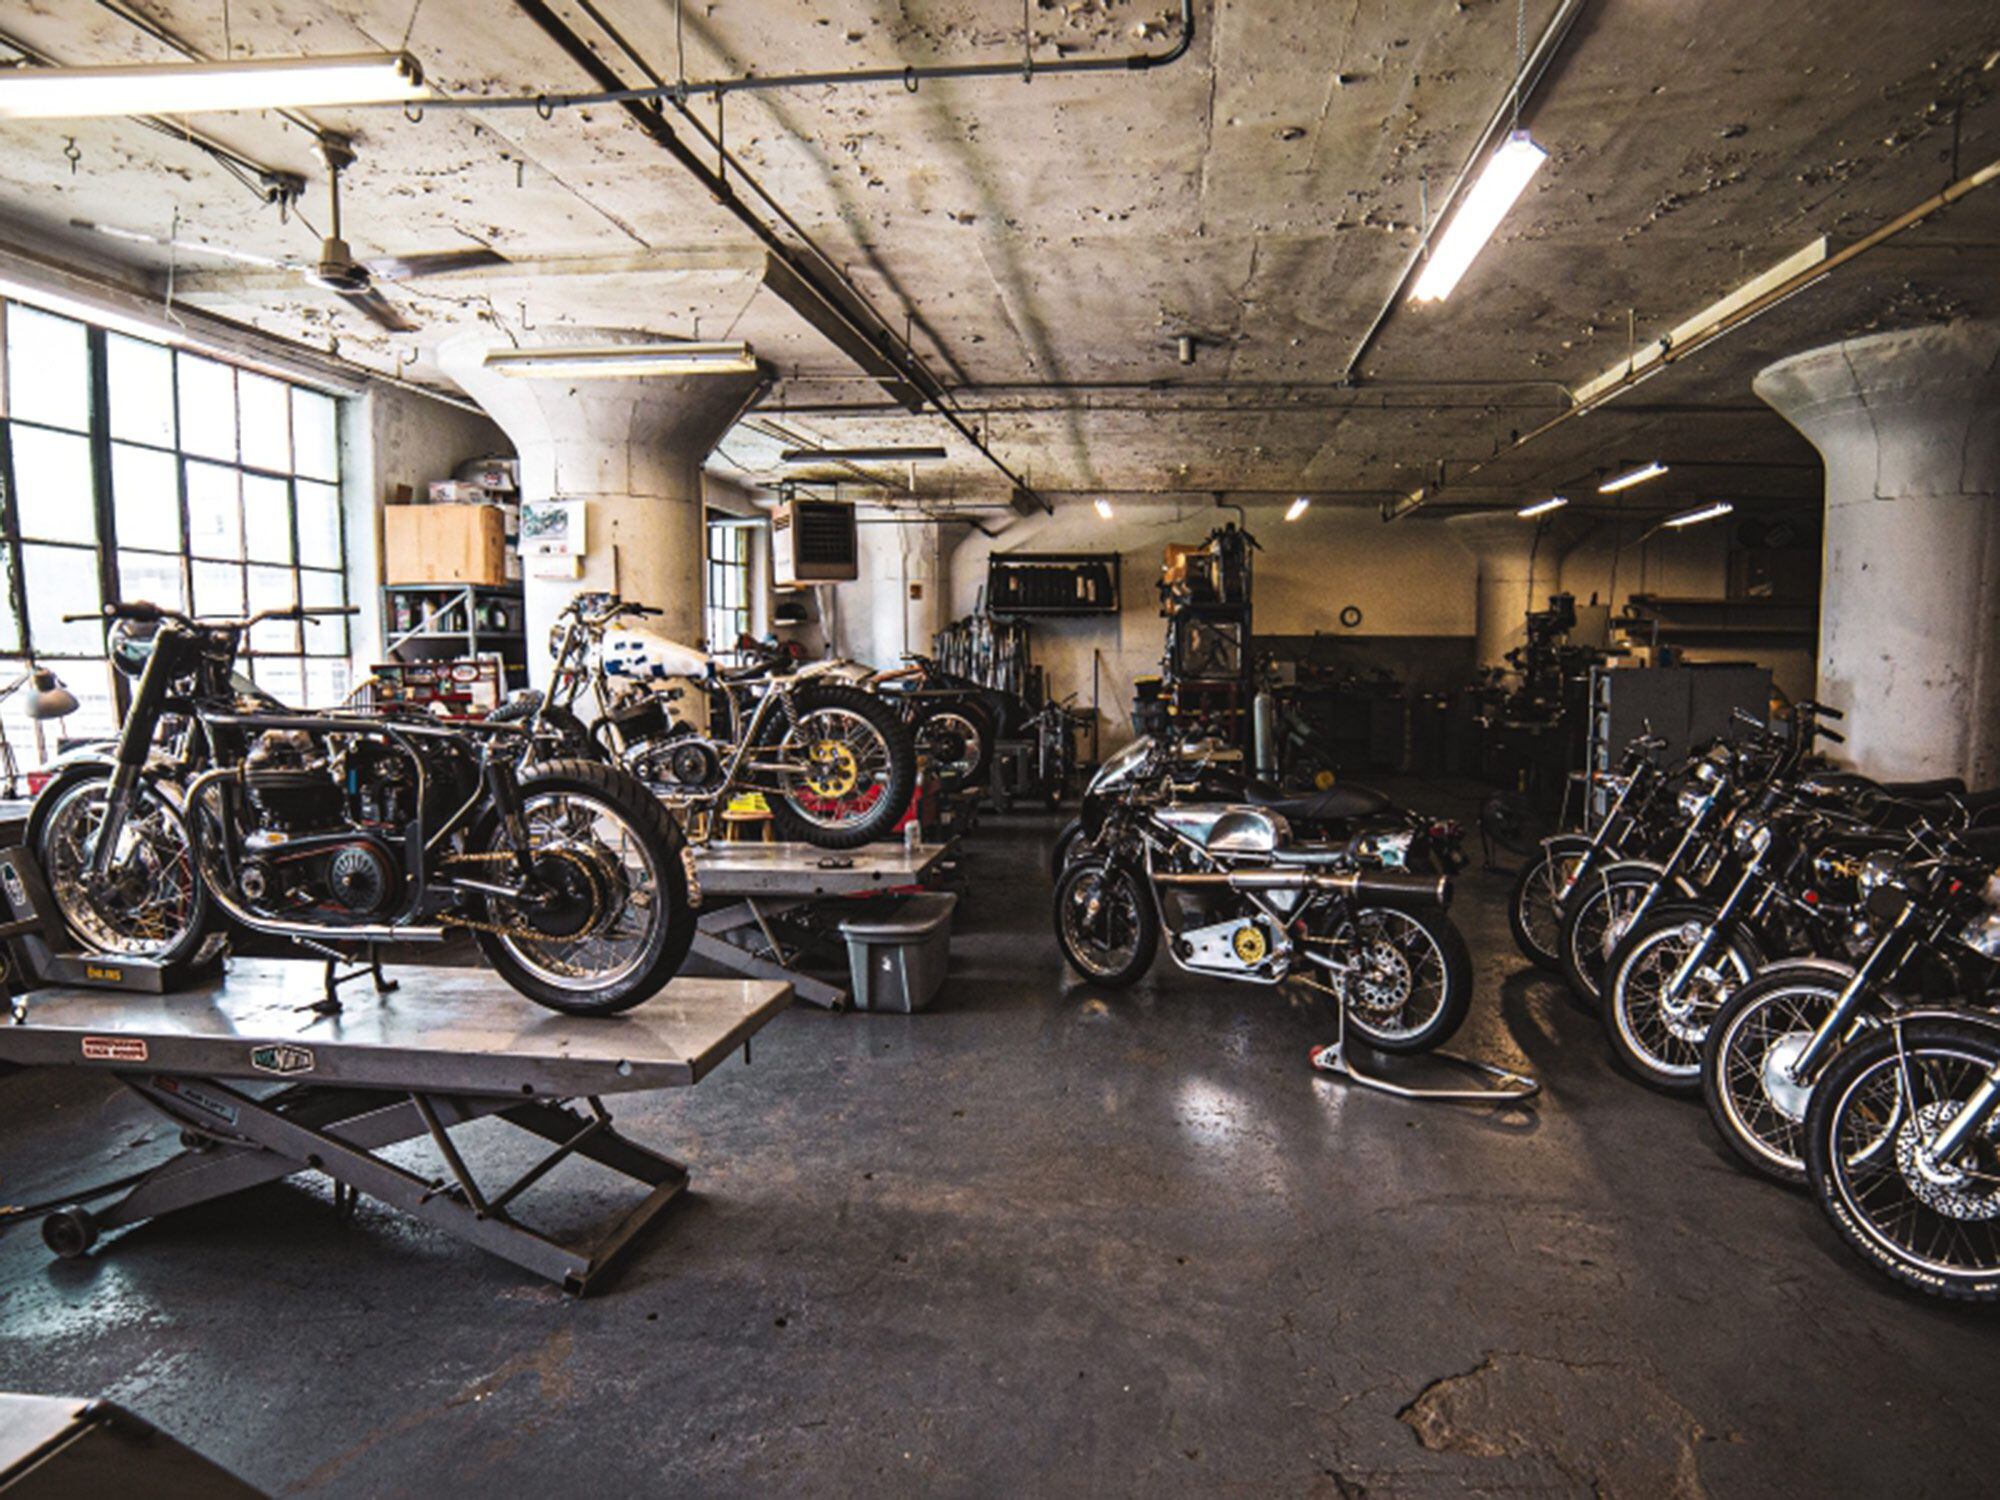 NYC Norton is housed in a 4,200-square-foot loft in Jersey City. Cummings’ shop was originally part of Spannerland, a cooperative he and several moto nuts set up 14 years ago. Next door, Cosentino Engineering builds several components for Cummings, including a Showa cartridge upgrade kit for Roadholder forks.